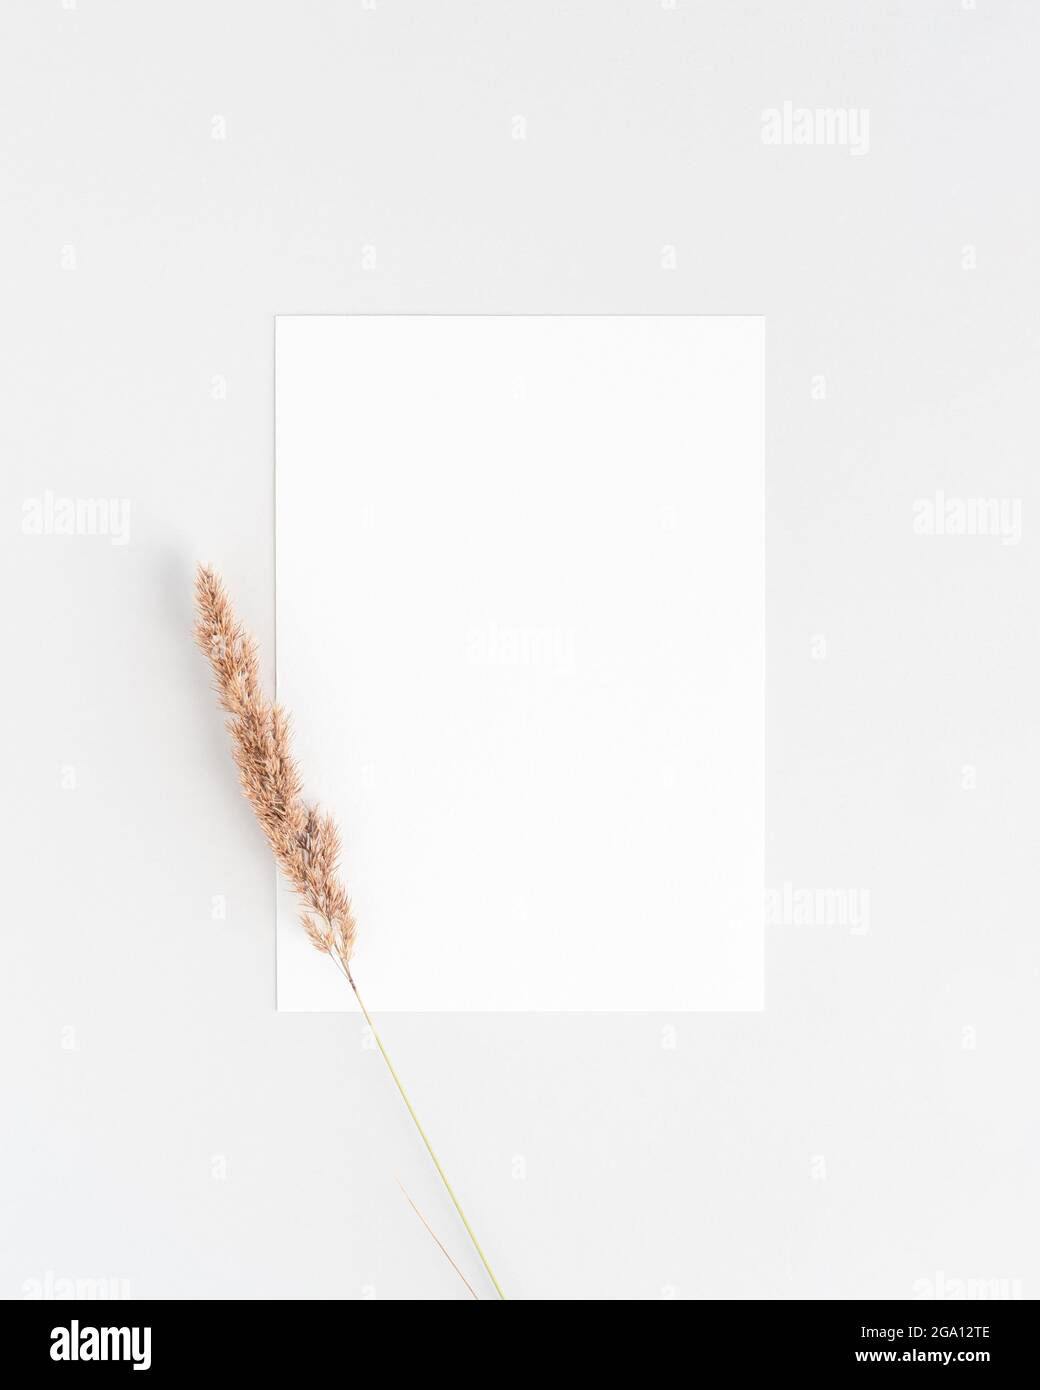 White invitation card mockup flat lay with a small dry pampass grass branch Stock Photo